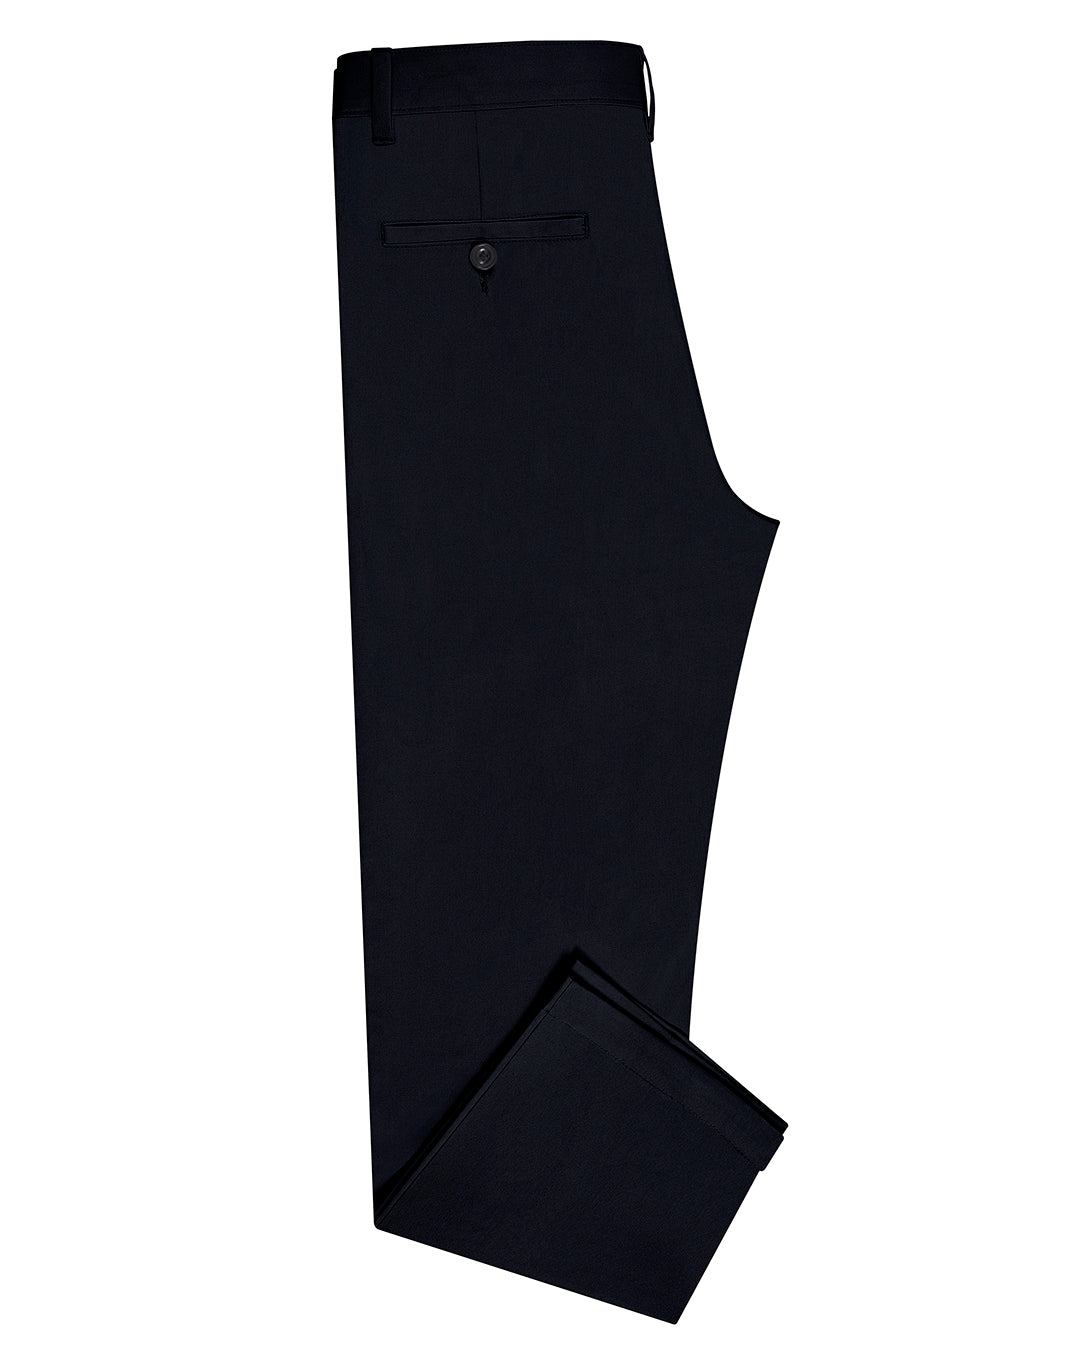 Side view of custom Genoa Chino pants for men by Luxire in navy